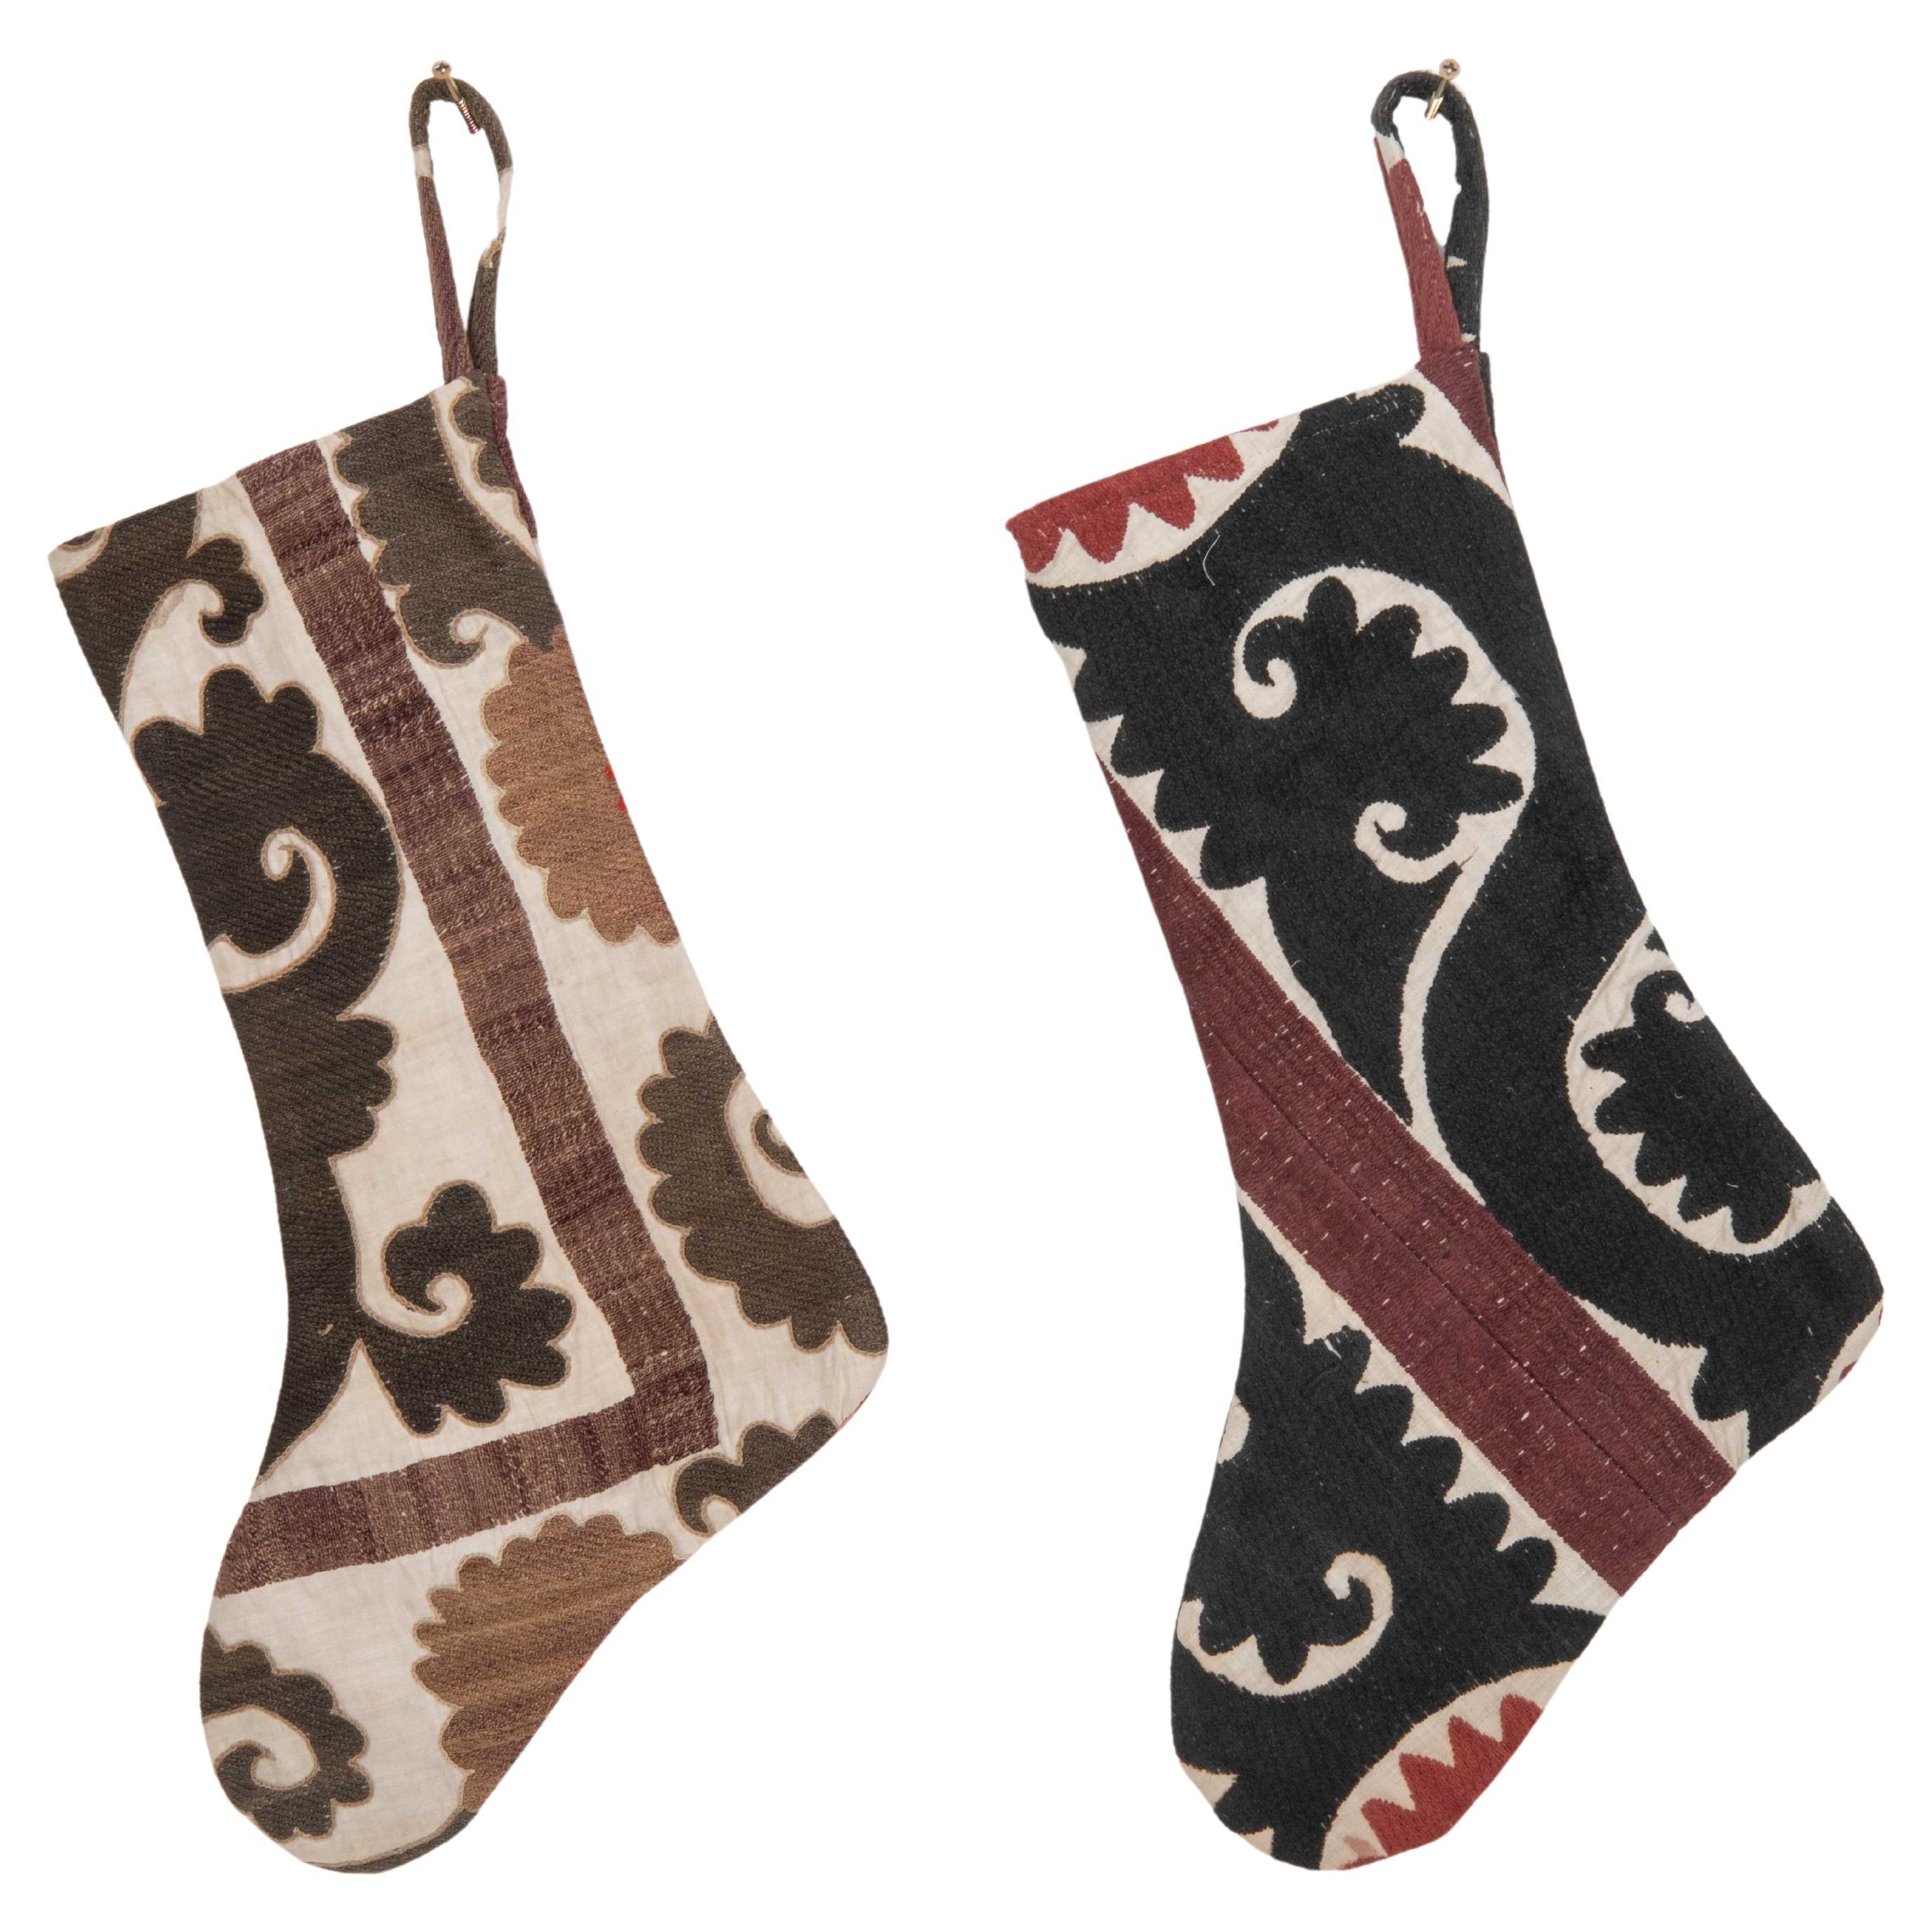 Double Sided Christmas Stockings Made from Vintage Suzani Fragments